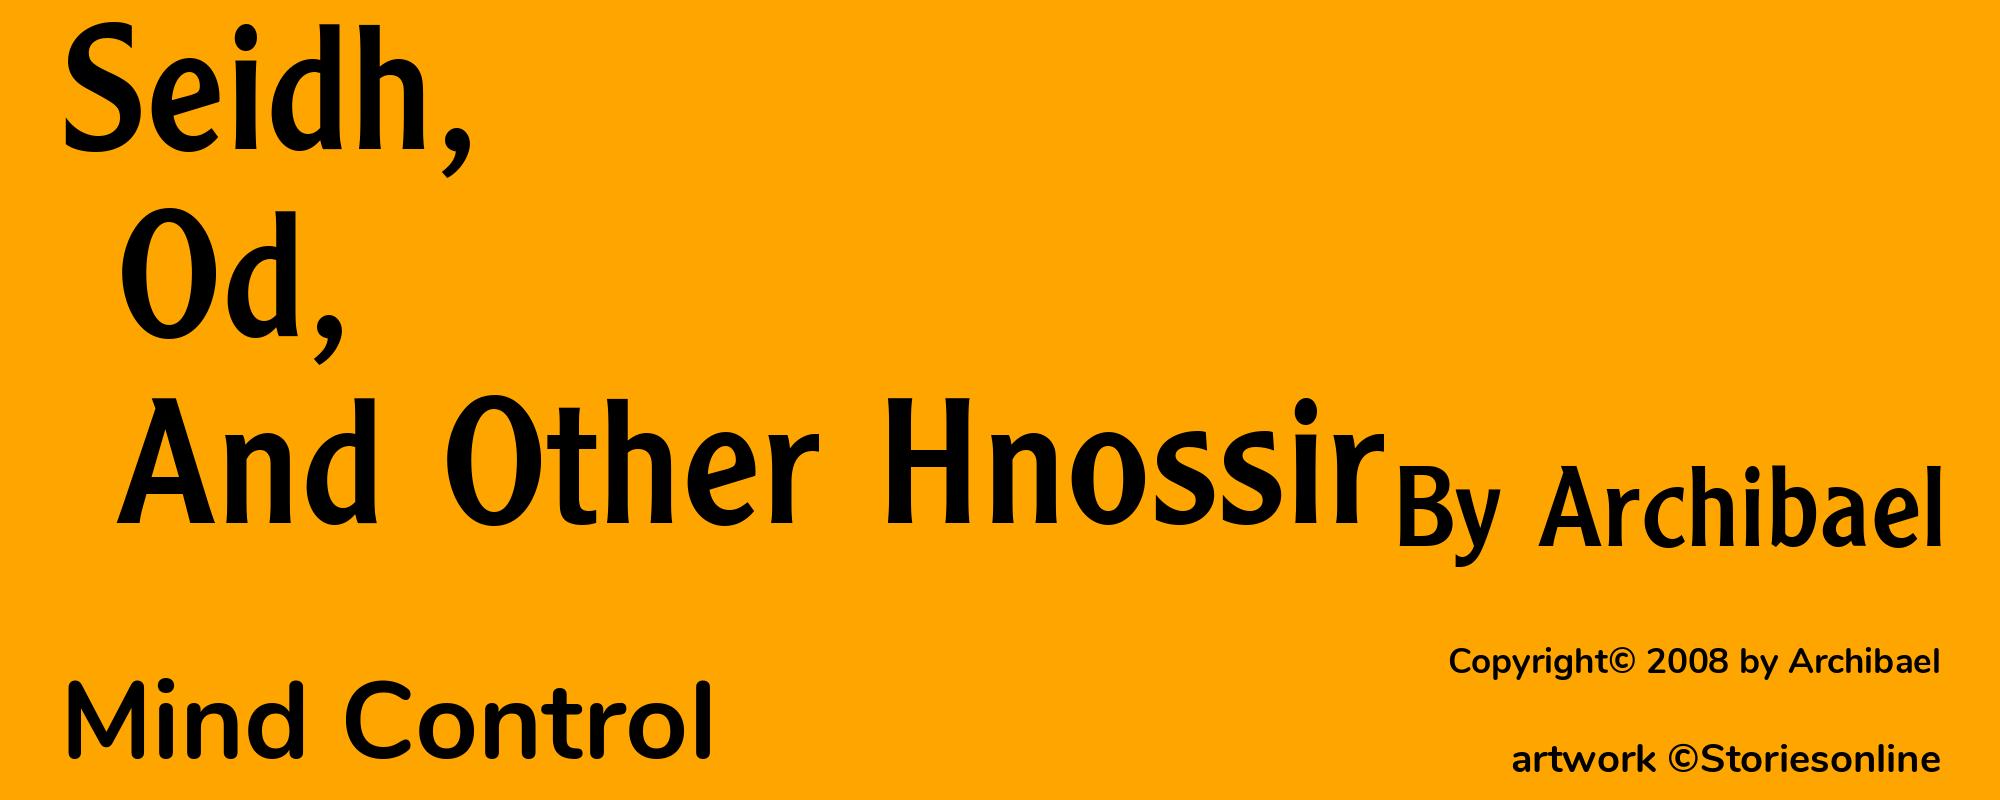 Seidh, Od, And Other Hnossir - Cover